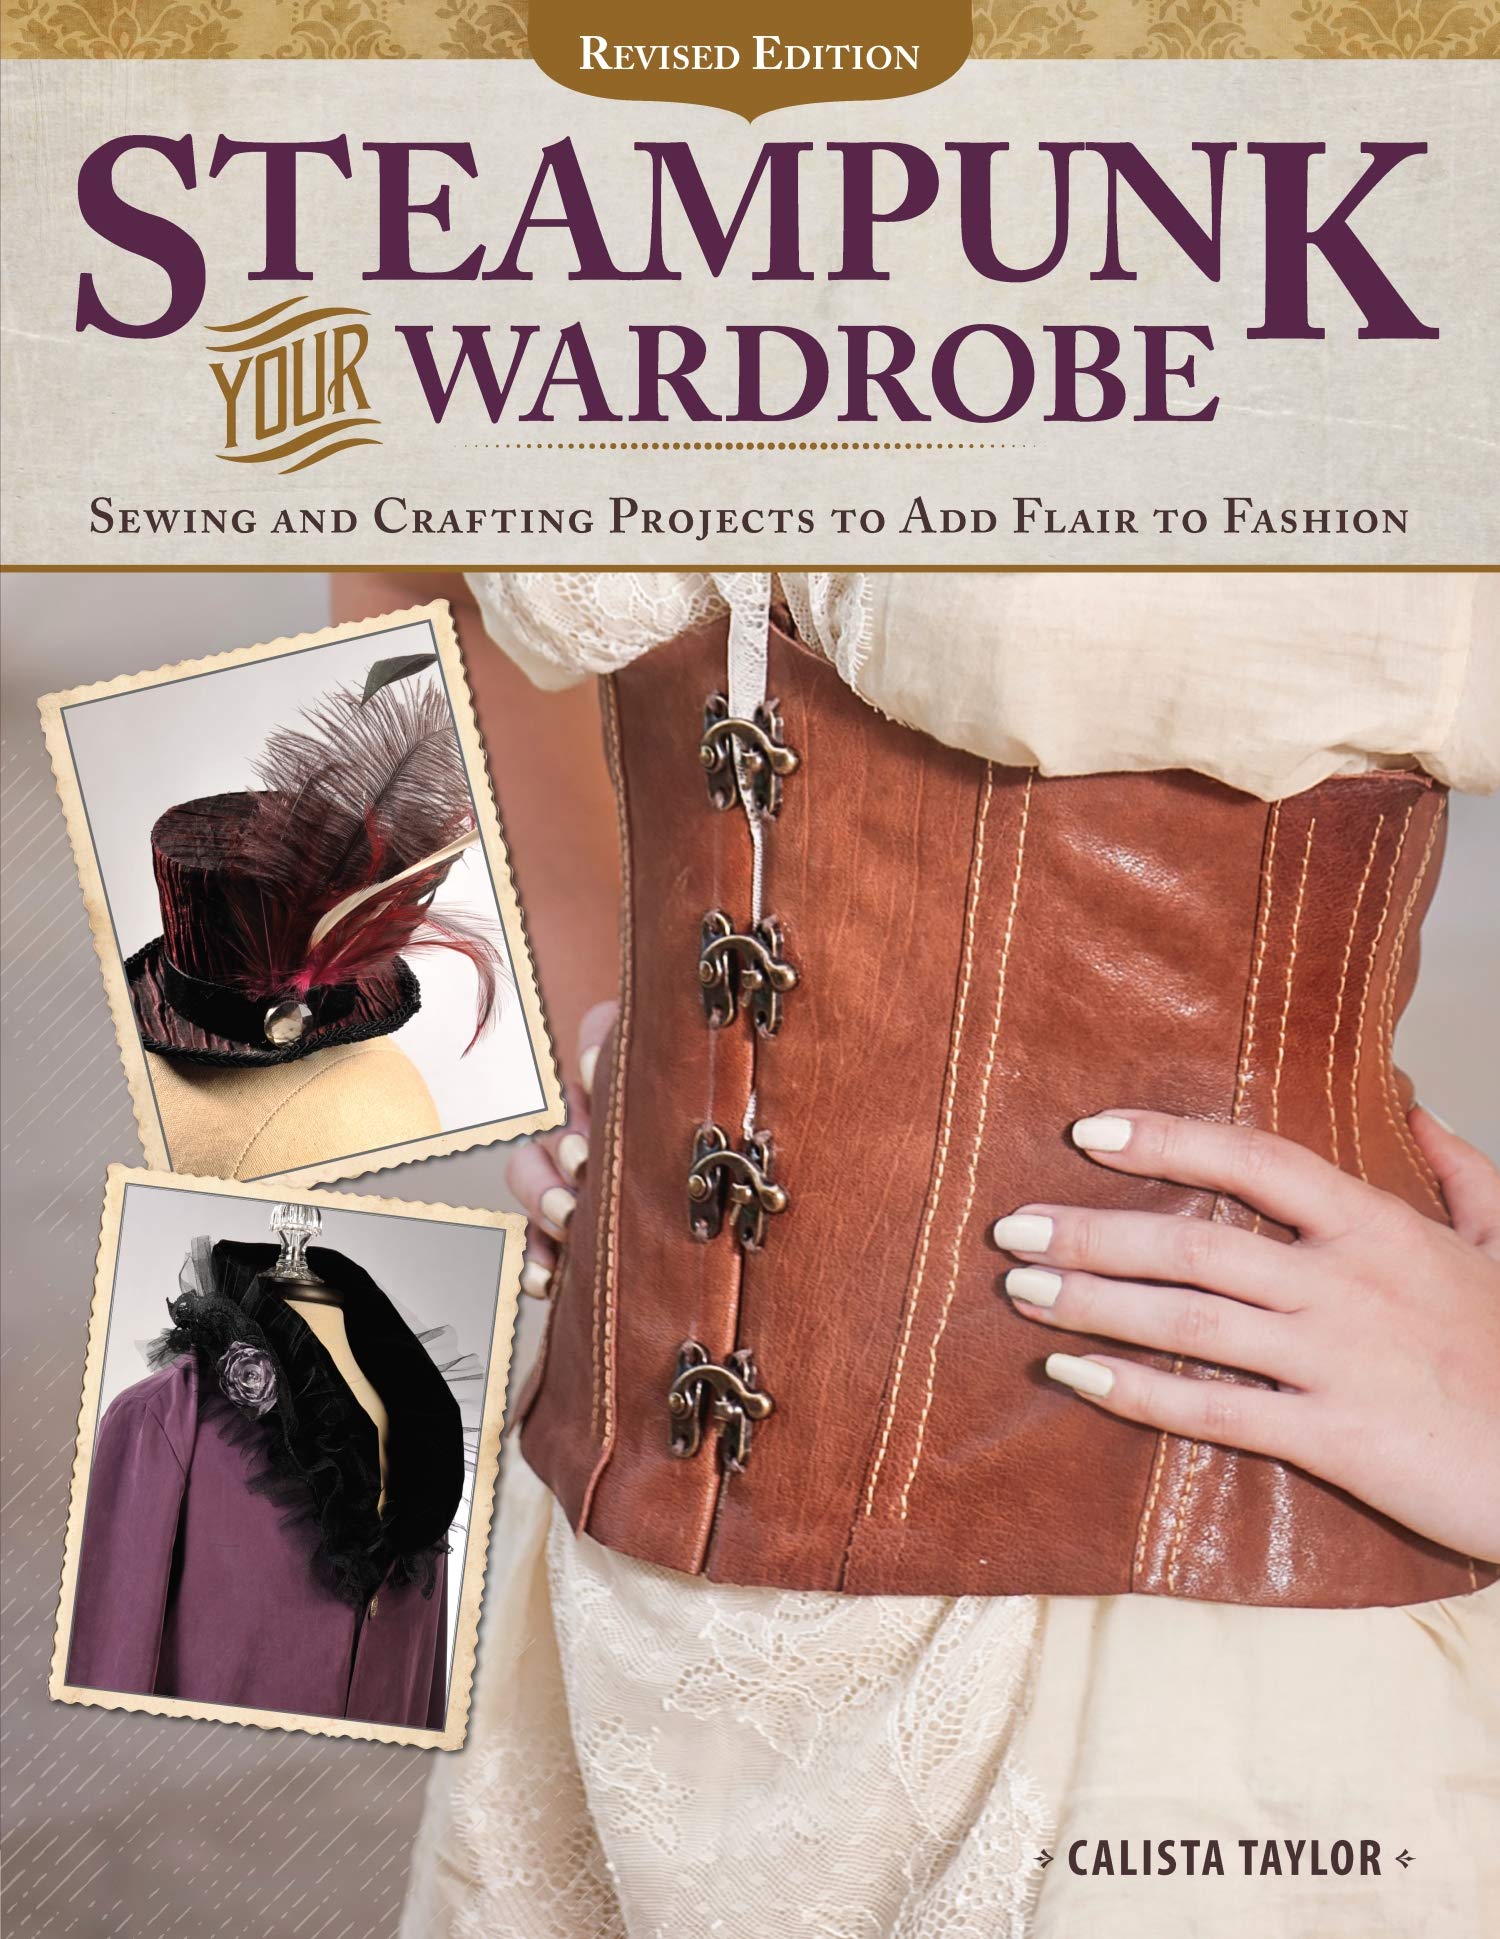 Steampunk Your Wardrobe, Revised Edition: Sewing and Crafting Projects to Add Flair to Fashion (Design Originals)